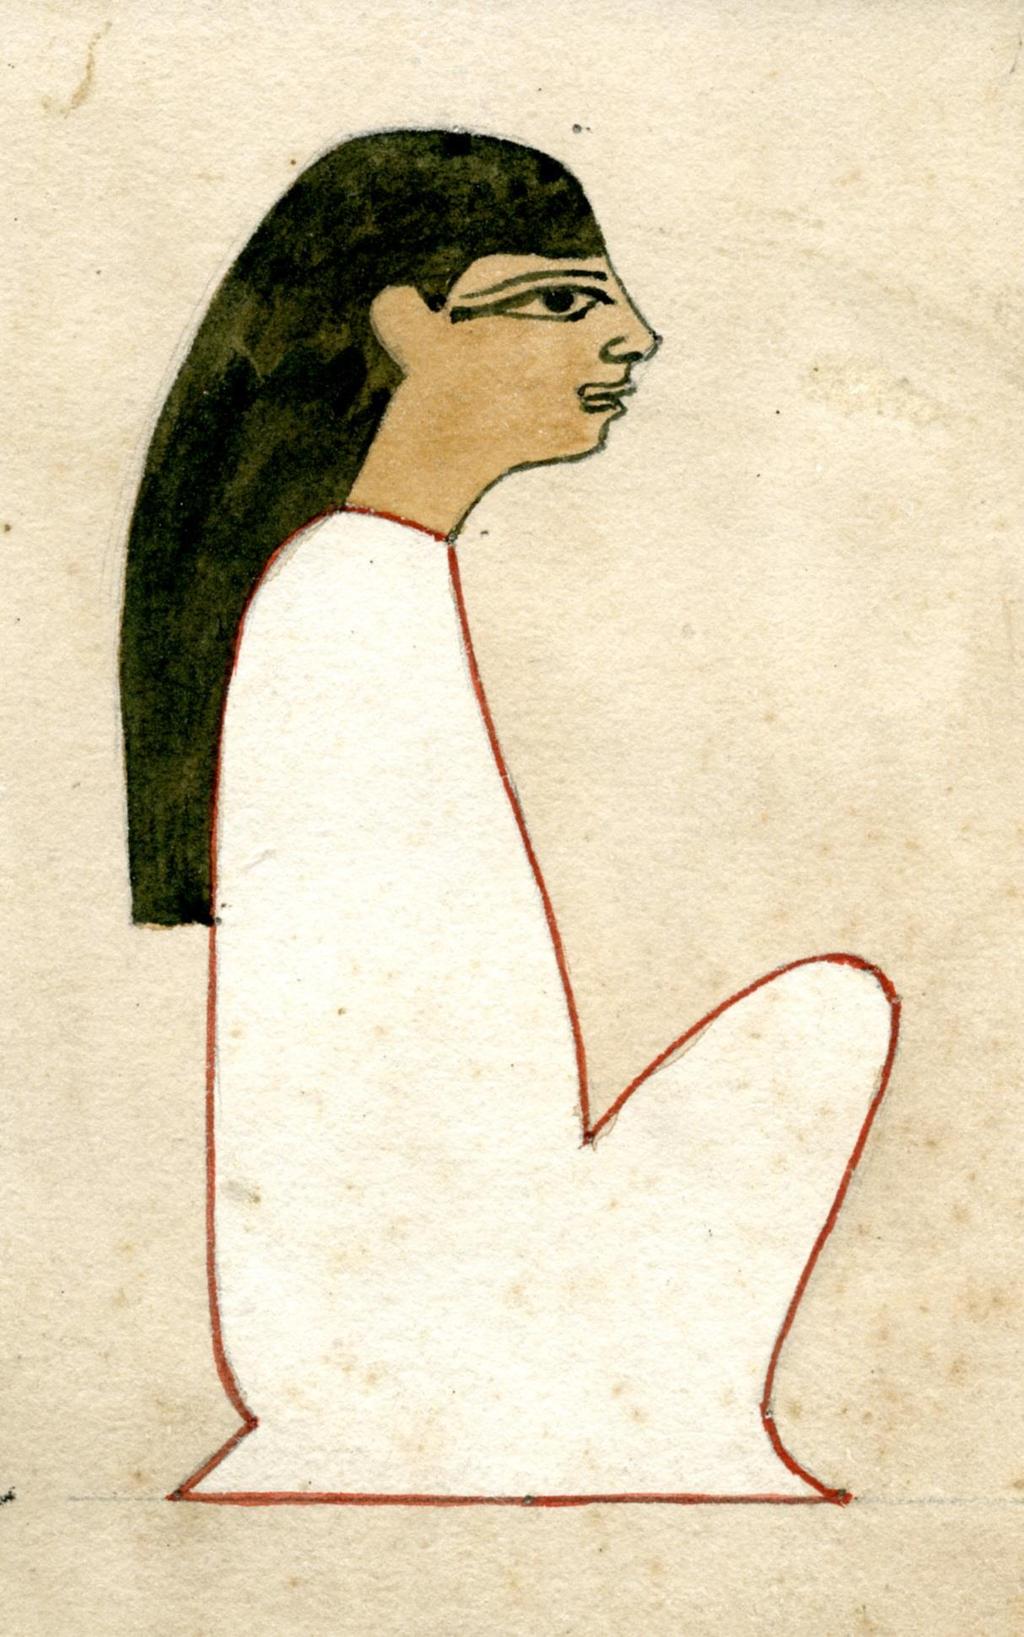 Seated woman hieroglyph [Gardiner B1] from the